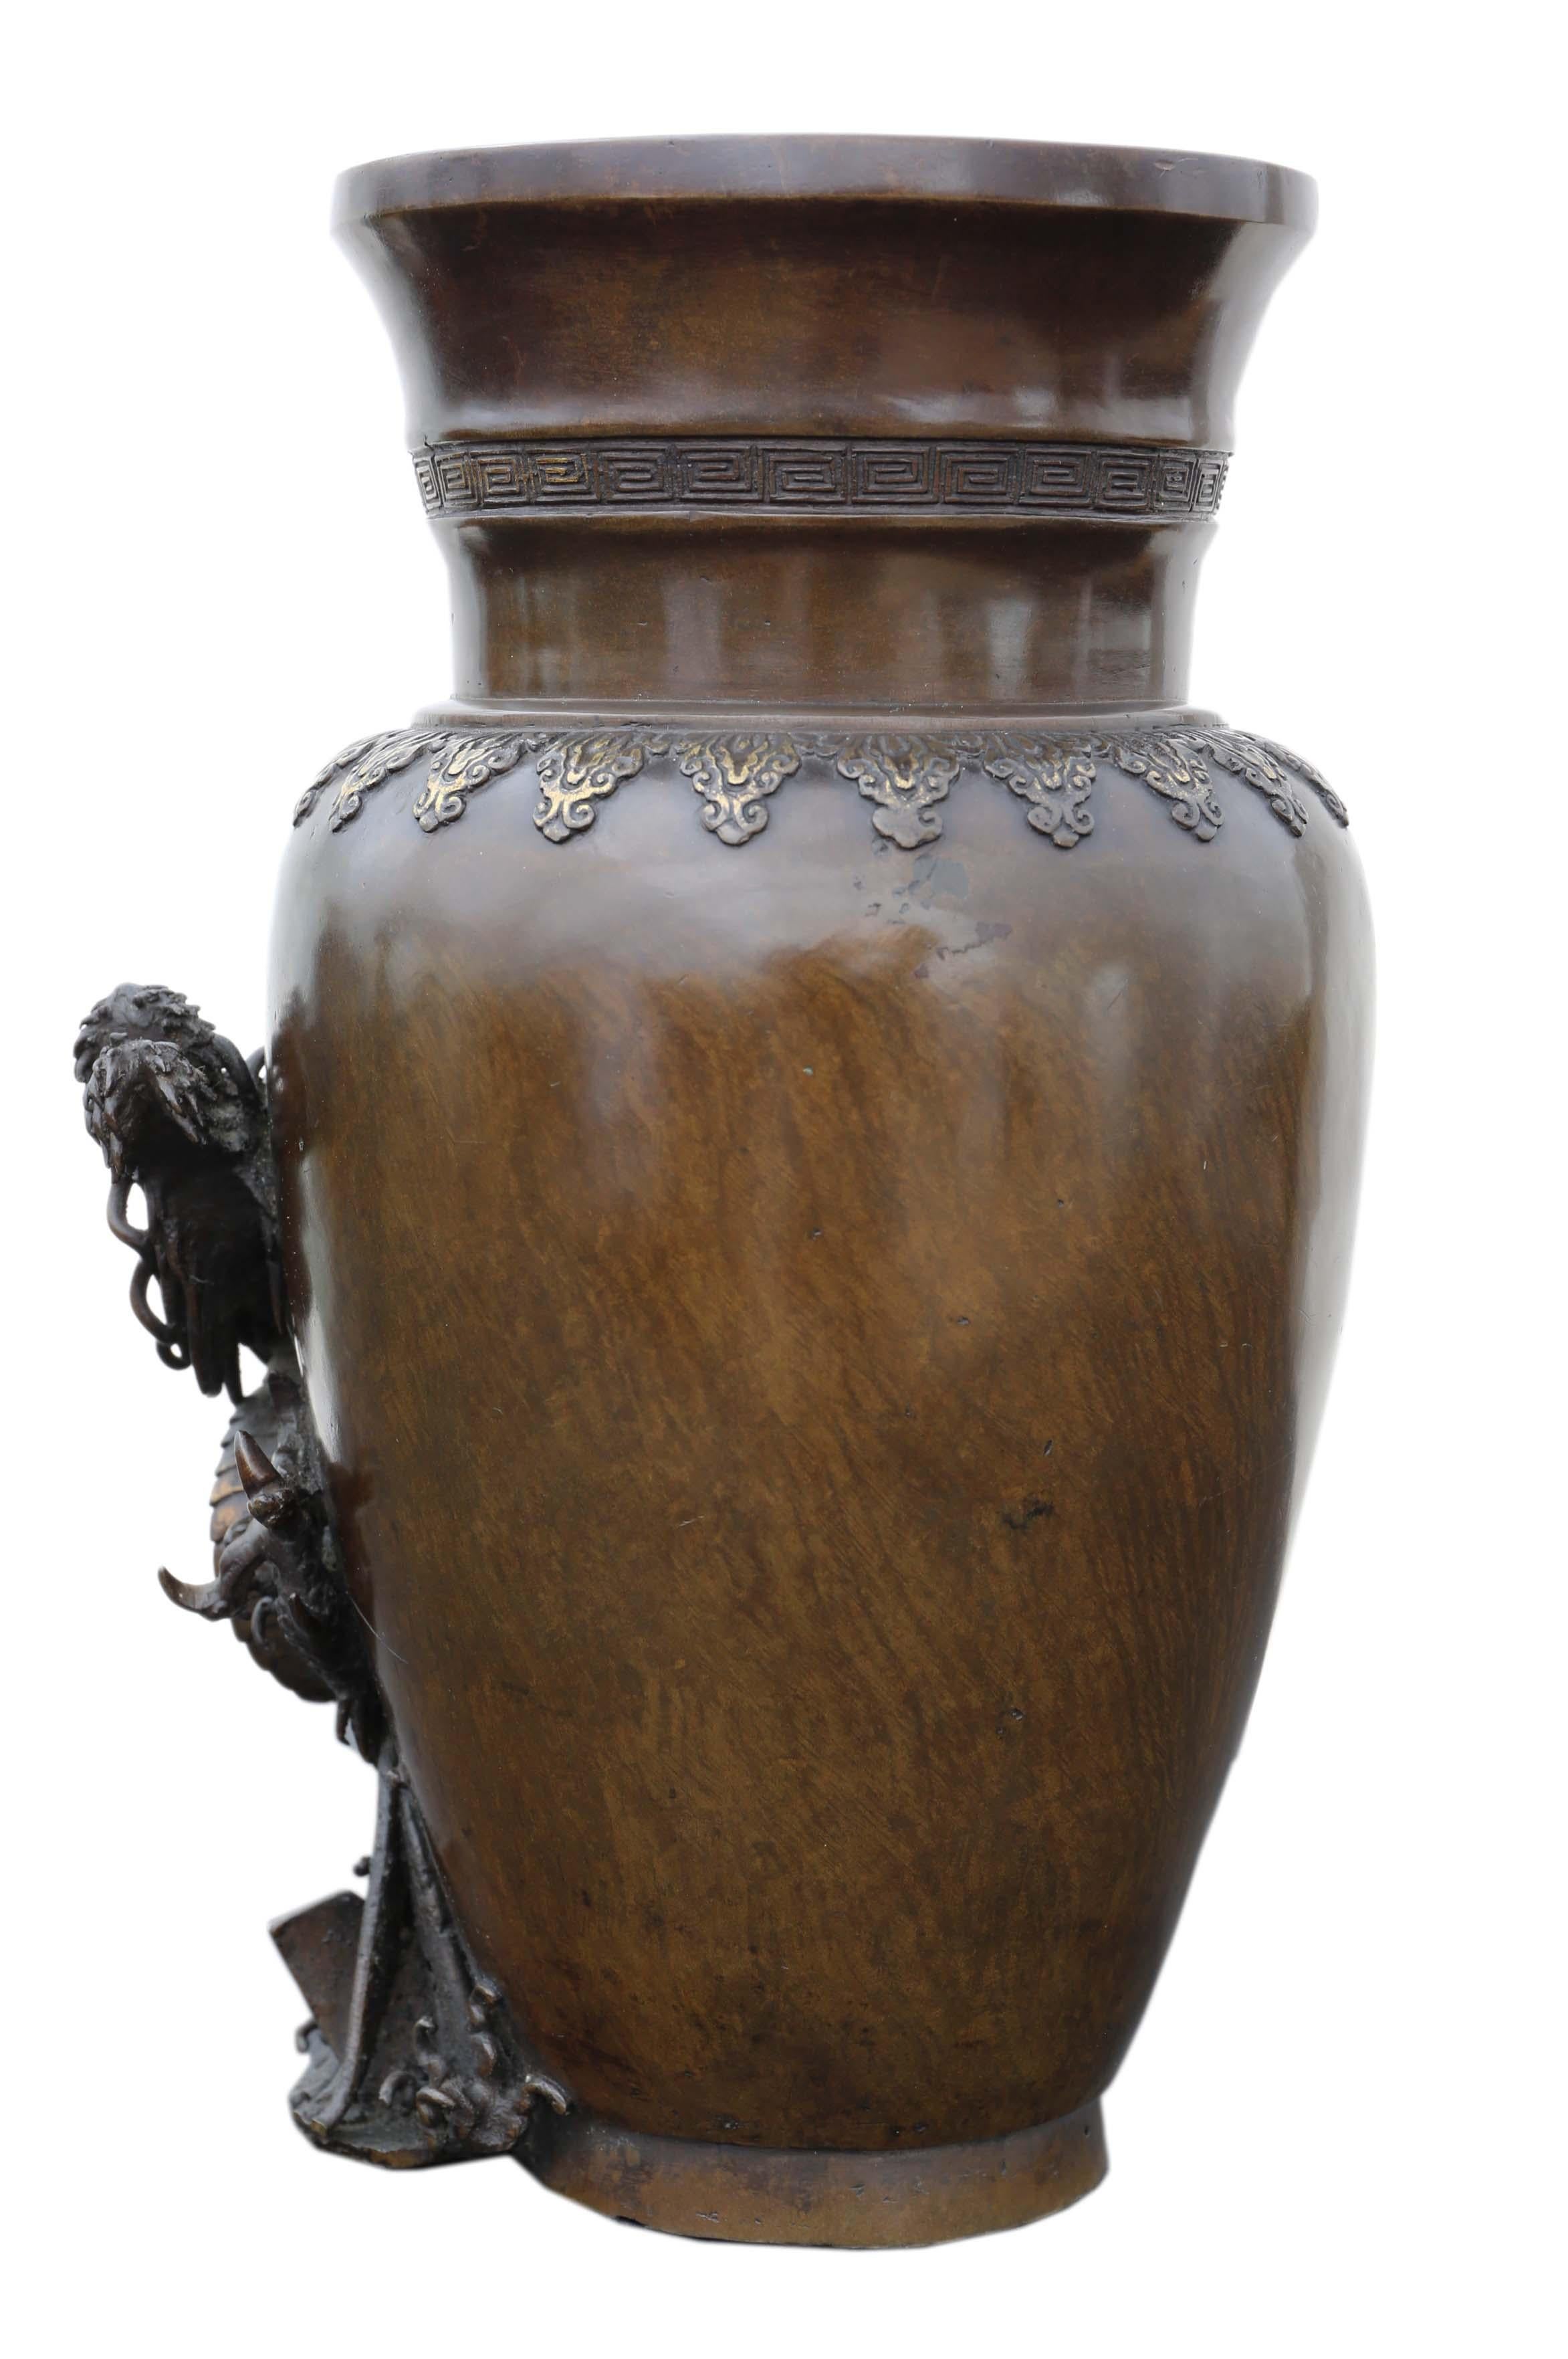 Large signed Japanese 19th century Meiji period bronze dragon vase.
Would look amazing in the right location. The very best color and patina. Exudes quality.
Overall maximum dimensions: ~32cm high x 20cm diameter (inner mouth 13m diameter). Weighs